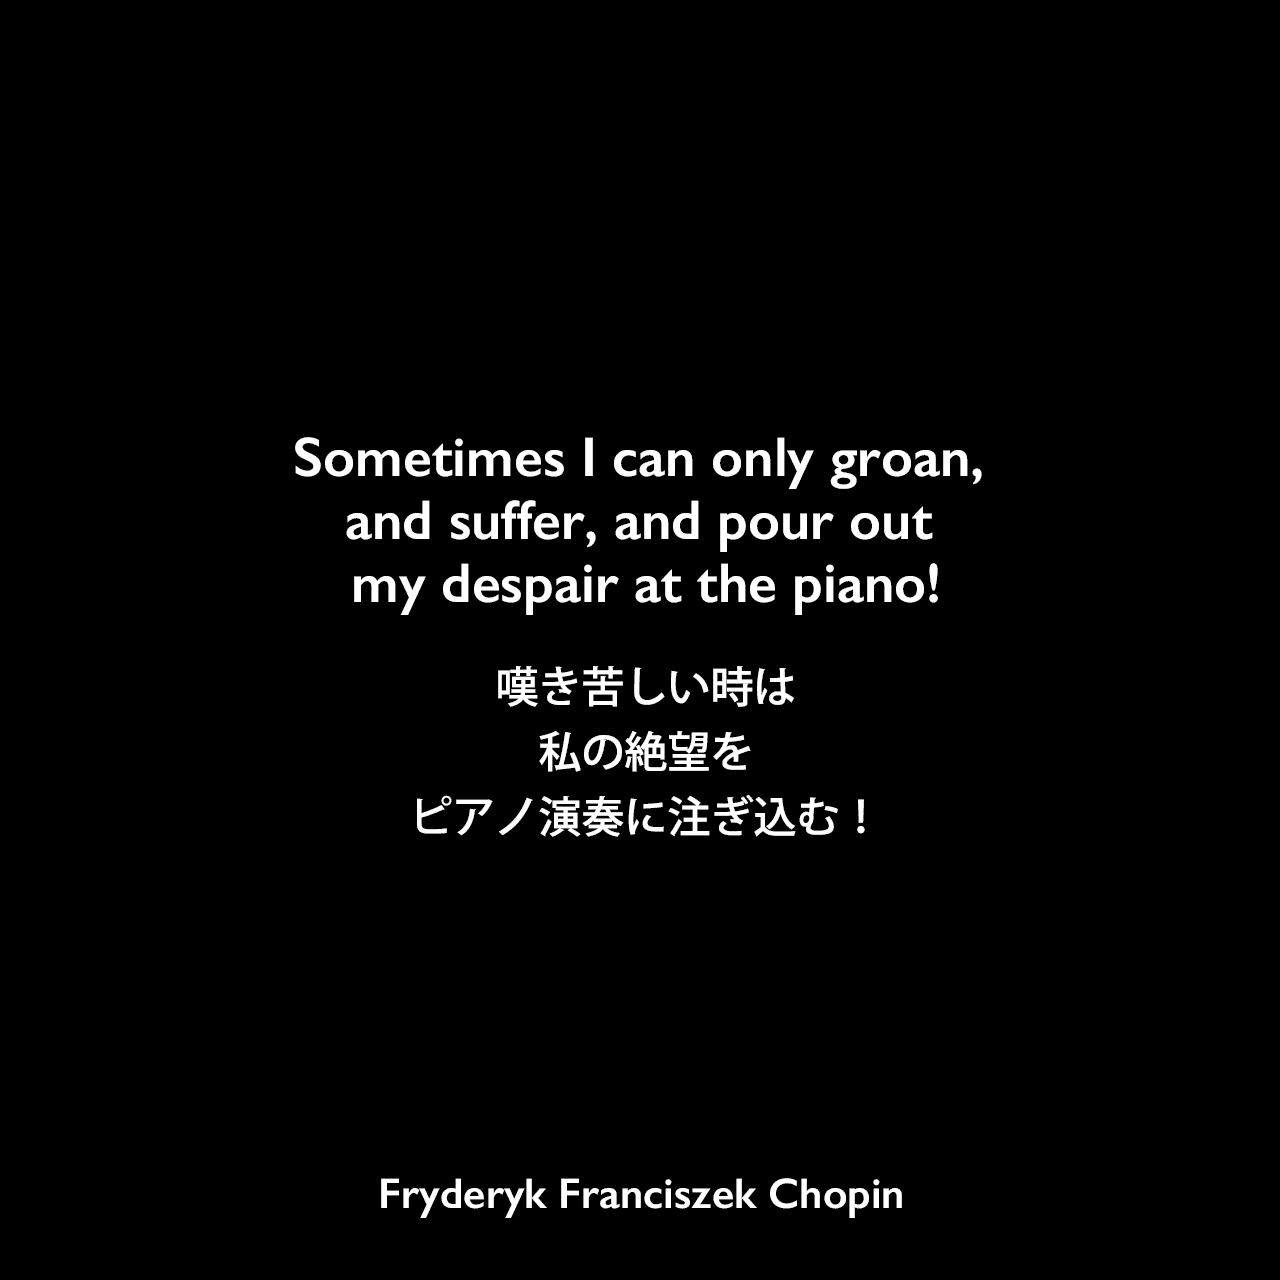 Sometimes I can only groan, and suffer, and pour out my despair at the piano!嘆き苦しい時は、私の絶望をピアノ演奏に注ぎ込む！- イェンス・A・ジョーゲンセン とセシリア・ジョーゲンセンの本「Chopin and the Swedish Nightingale」よりFryderyk Franciszek Chopin